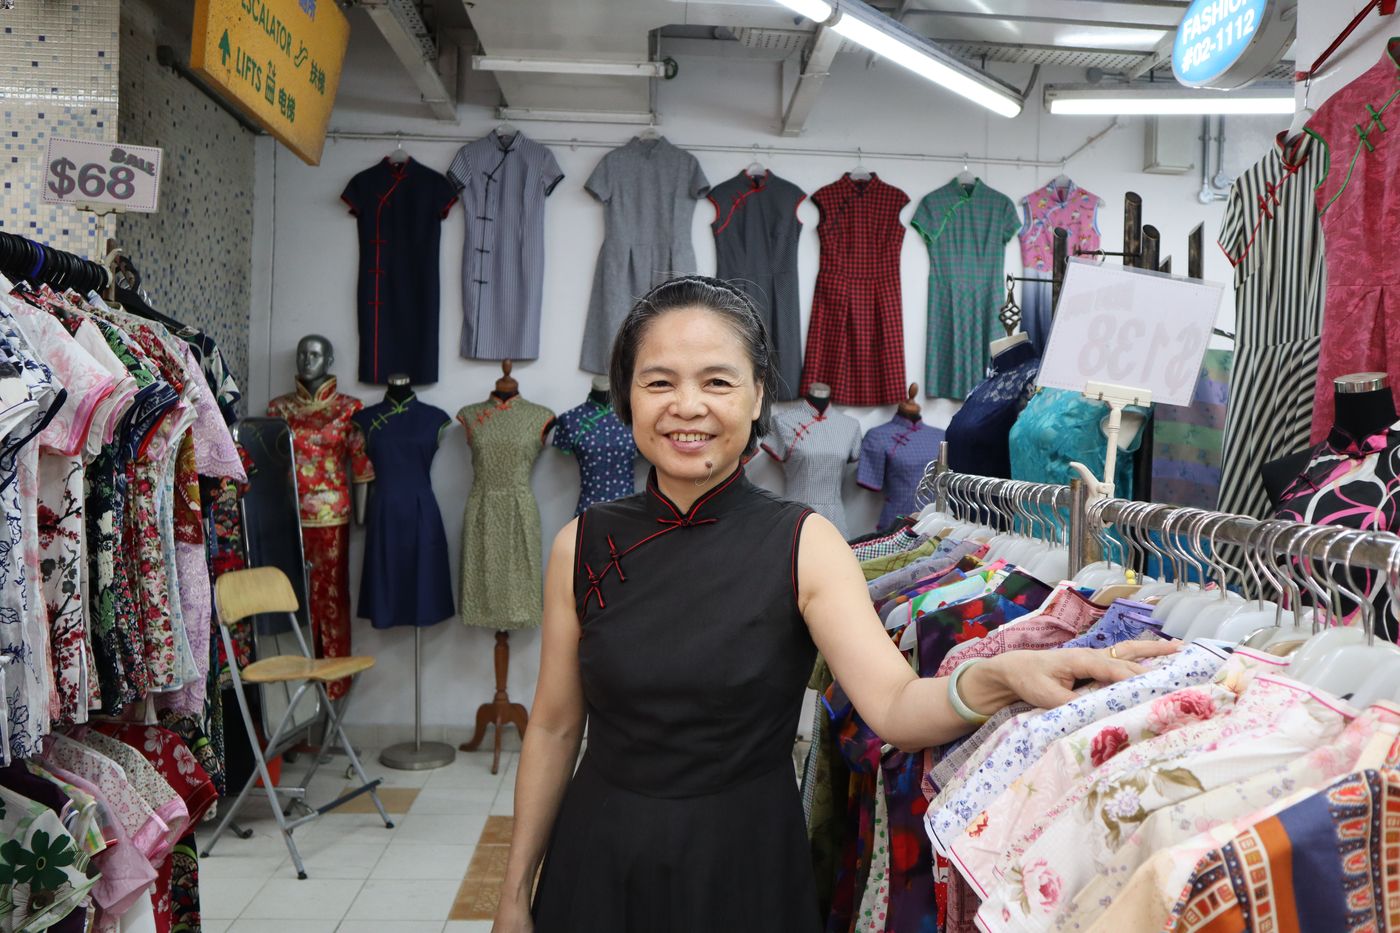 Madam Li Qiying has been in the cheongsam-making business for over four decades. She makes each cheongsam one by one, still cutting the pattern by hand from the fabric and using handmade buttons.